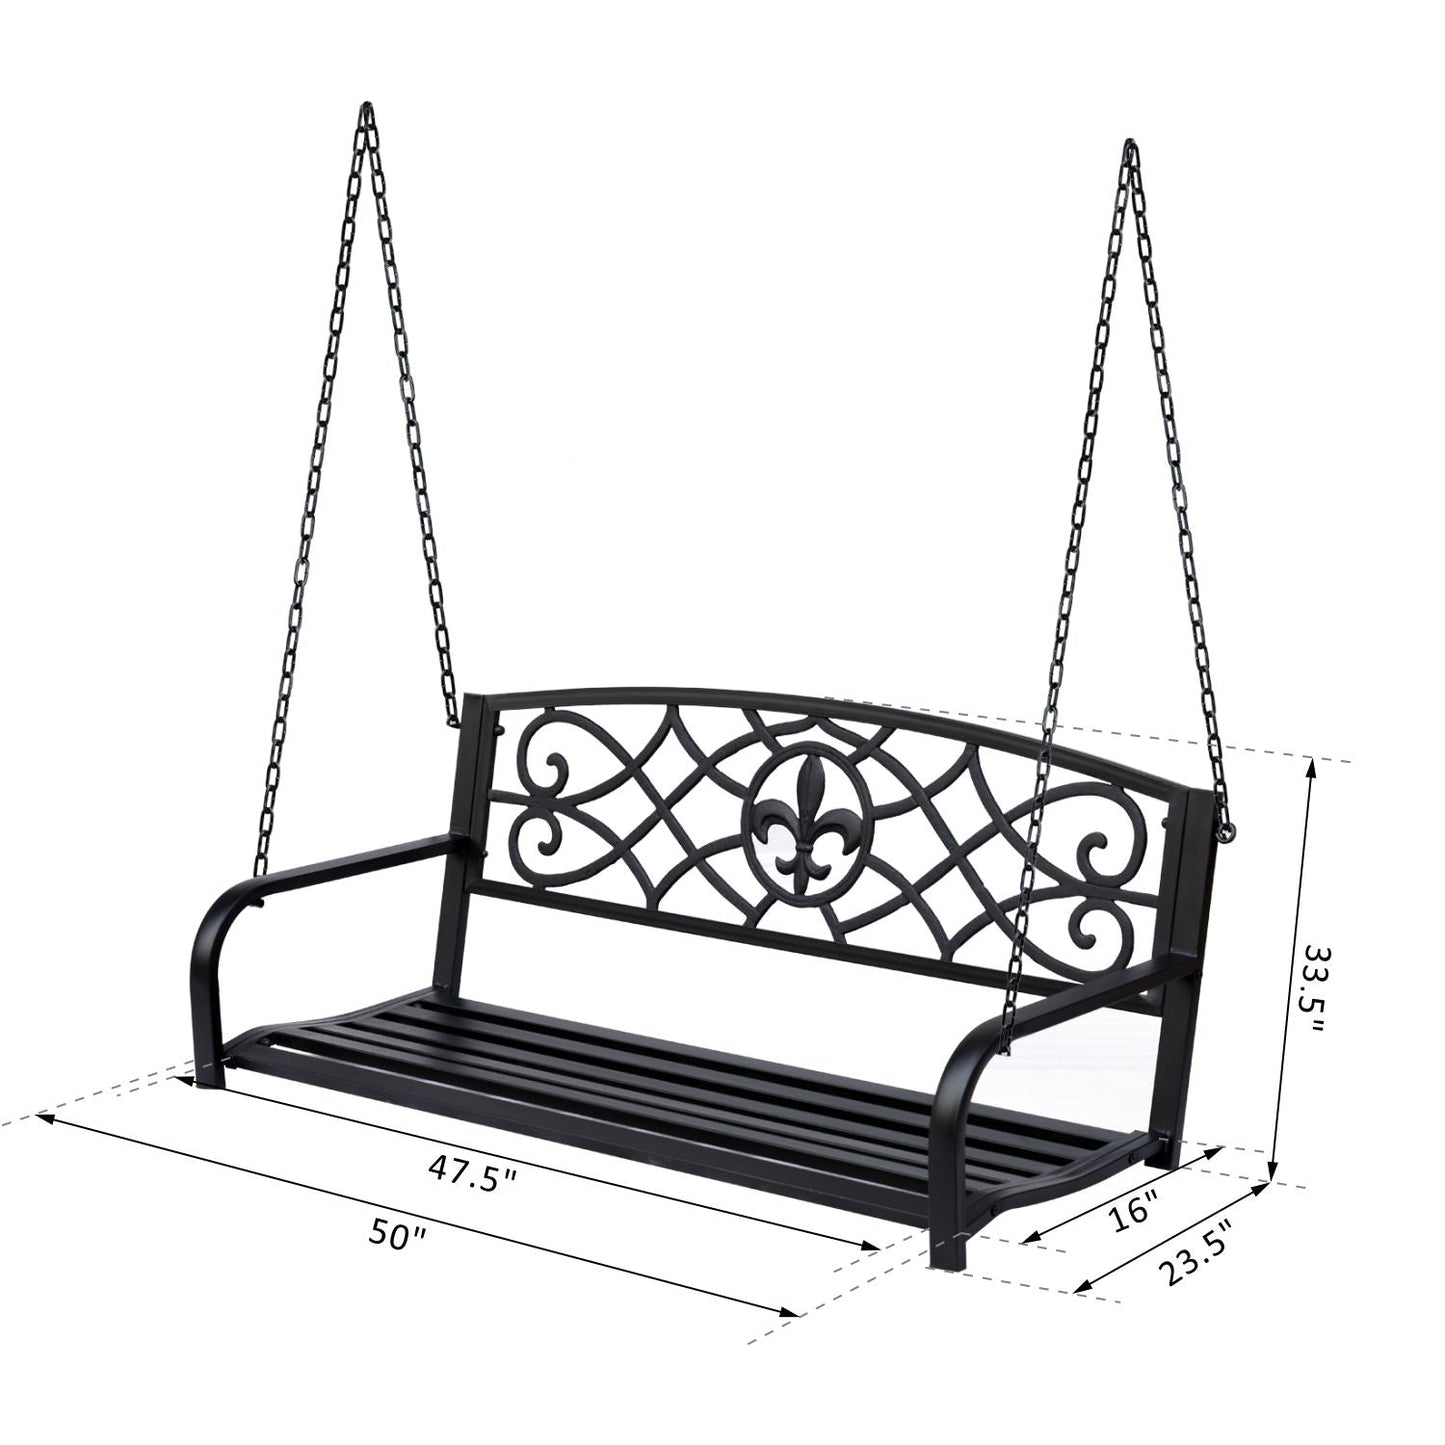 Outdoor and Garden-Steel Hanging Porch Swing, Fleur-de-Lis Design Outdoor Swing Seat Bench with Chains for the Yard, Deck, 485 LBS Weight Capacity, Bronze - Outdoor Style Company